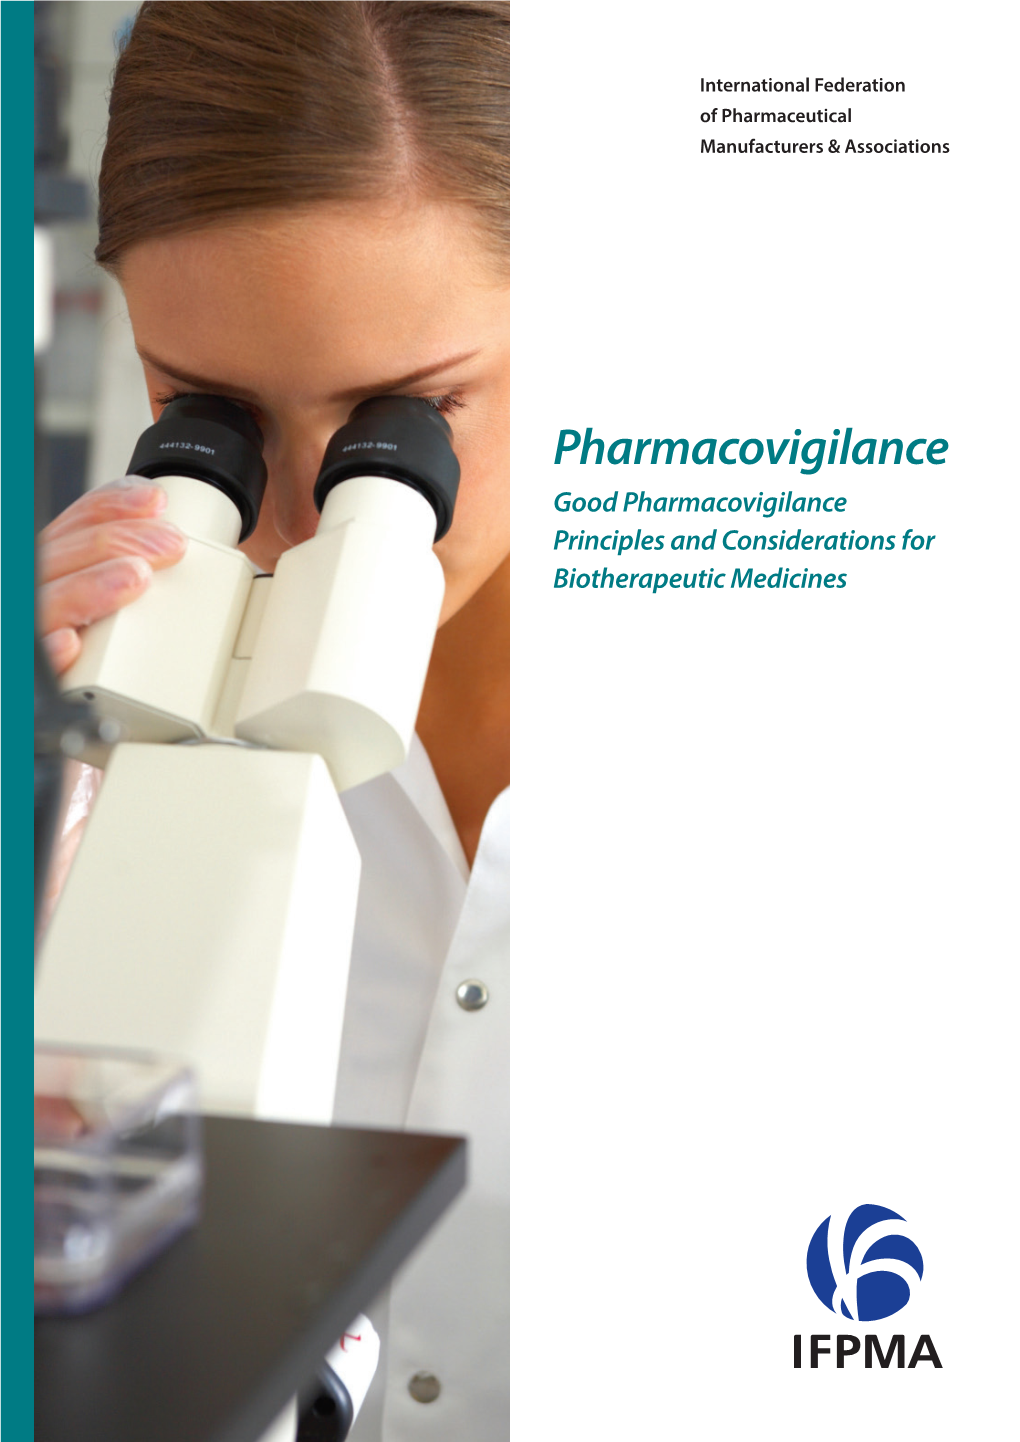 Good Pharmacovigilance Principles and Considerations for Biotherapeutic Medicines Contents Section Page